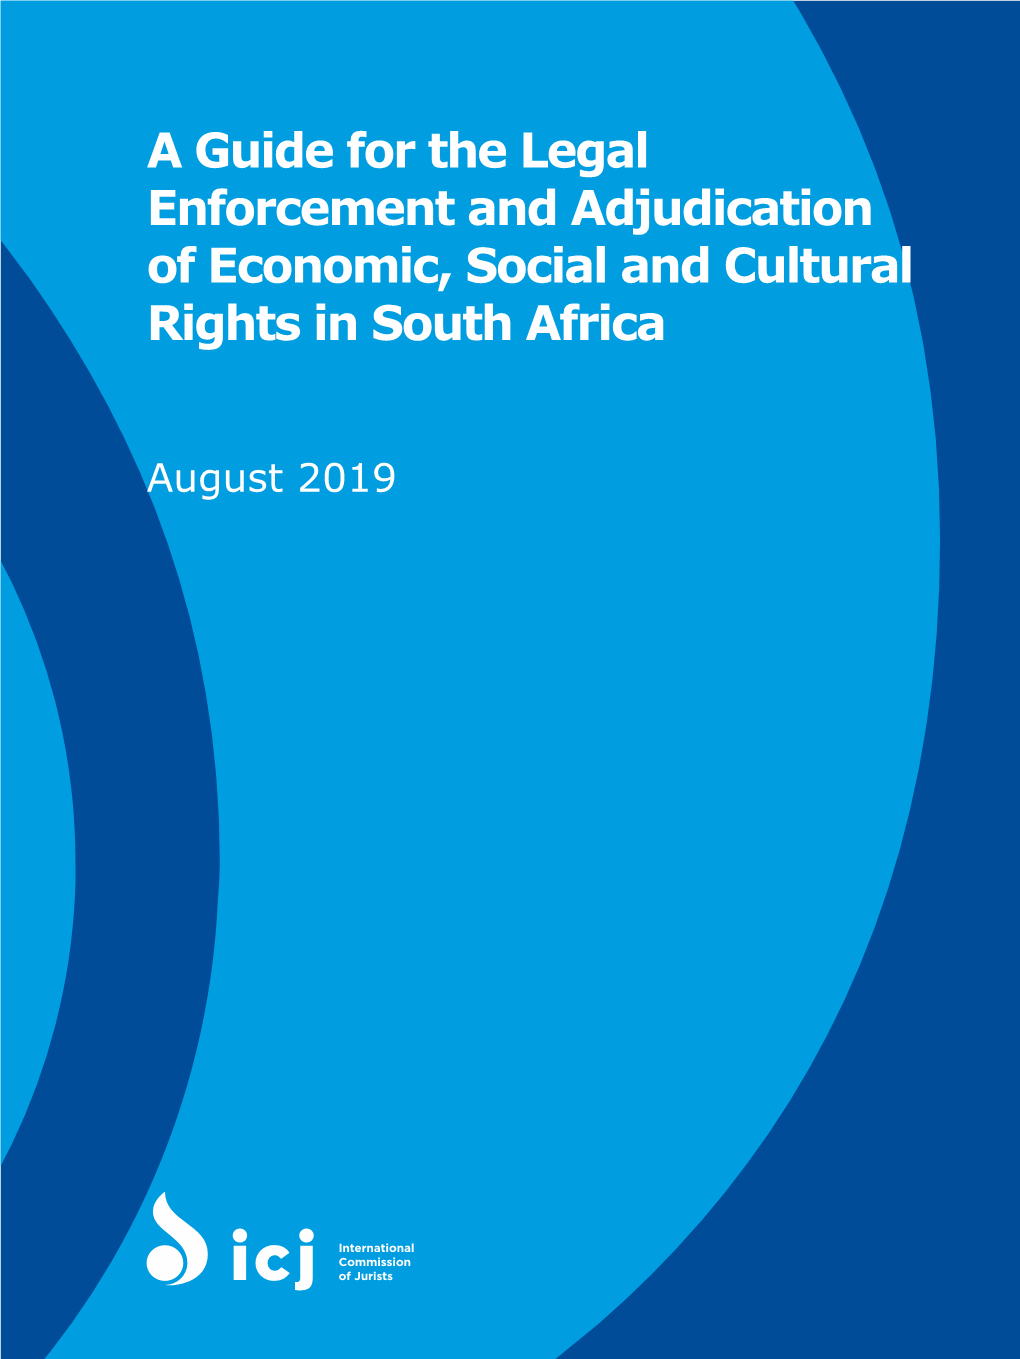 ESCR Litigation, Research and Advocacy in South Africa